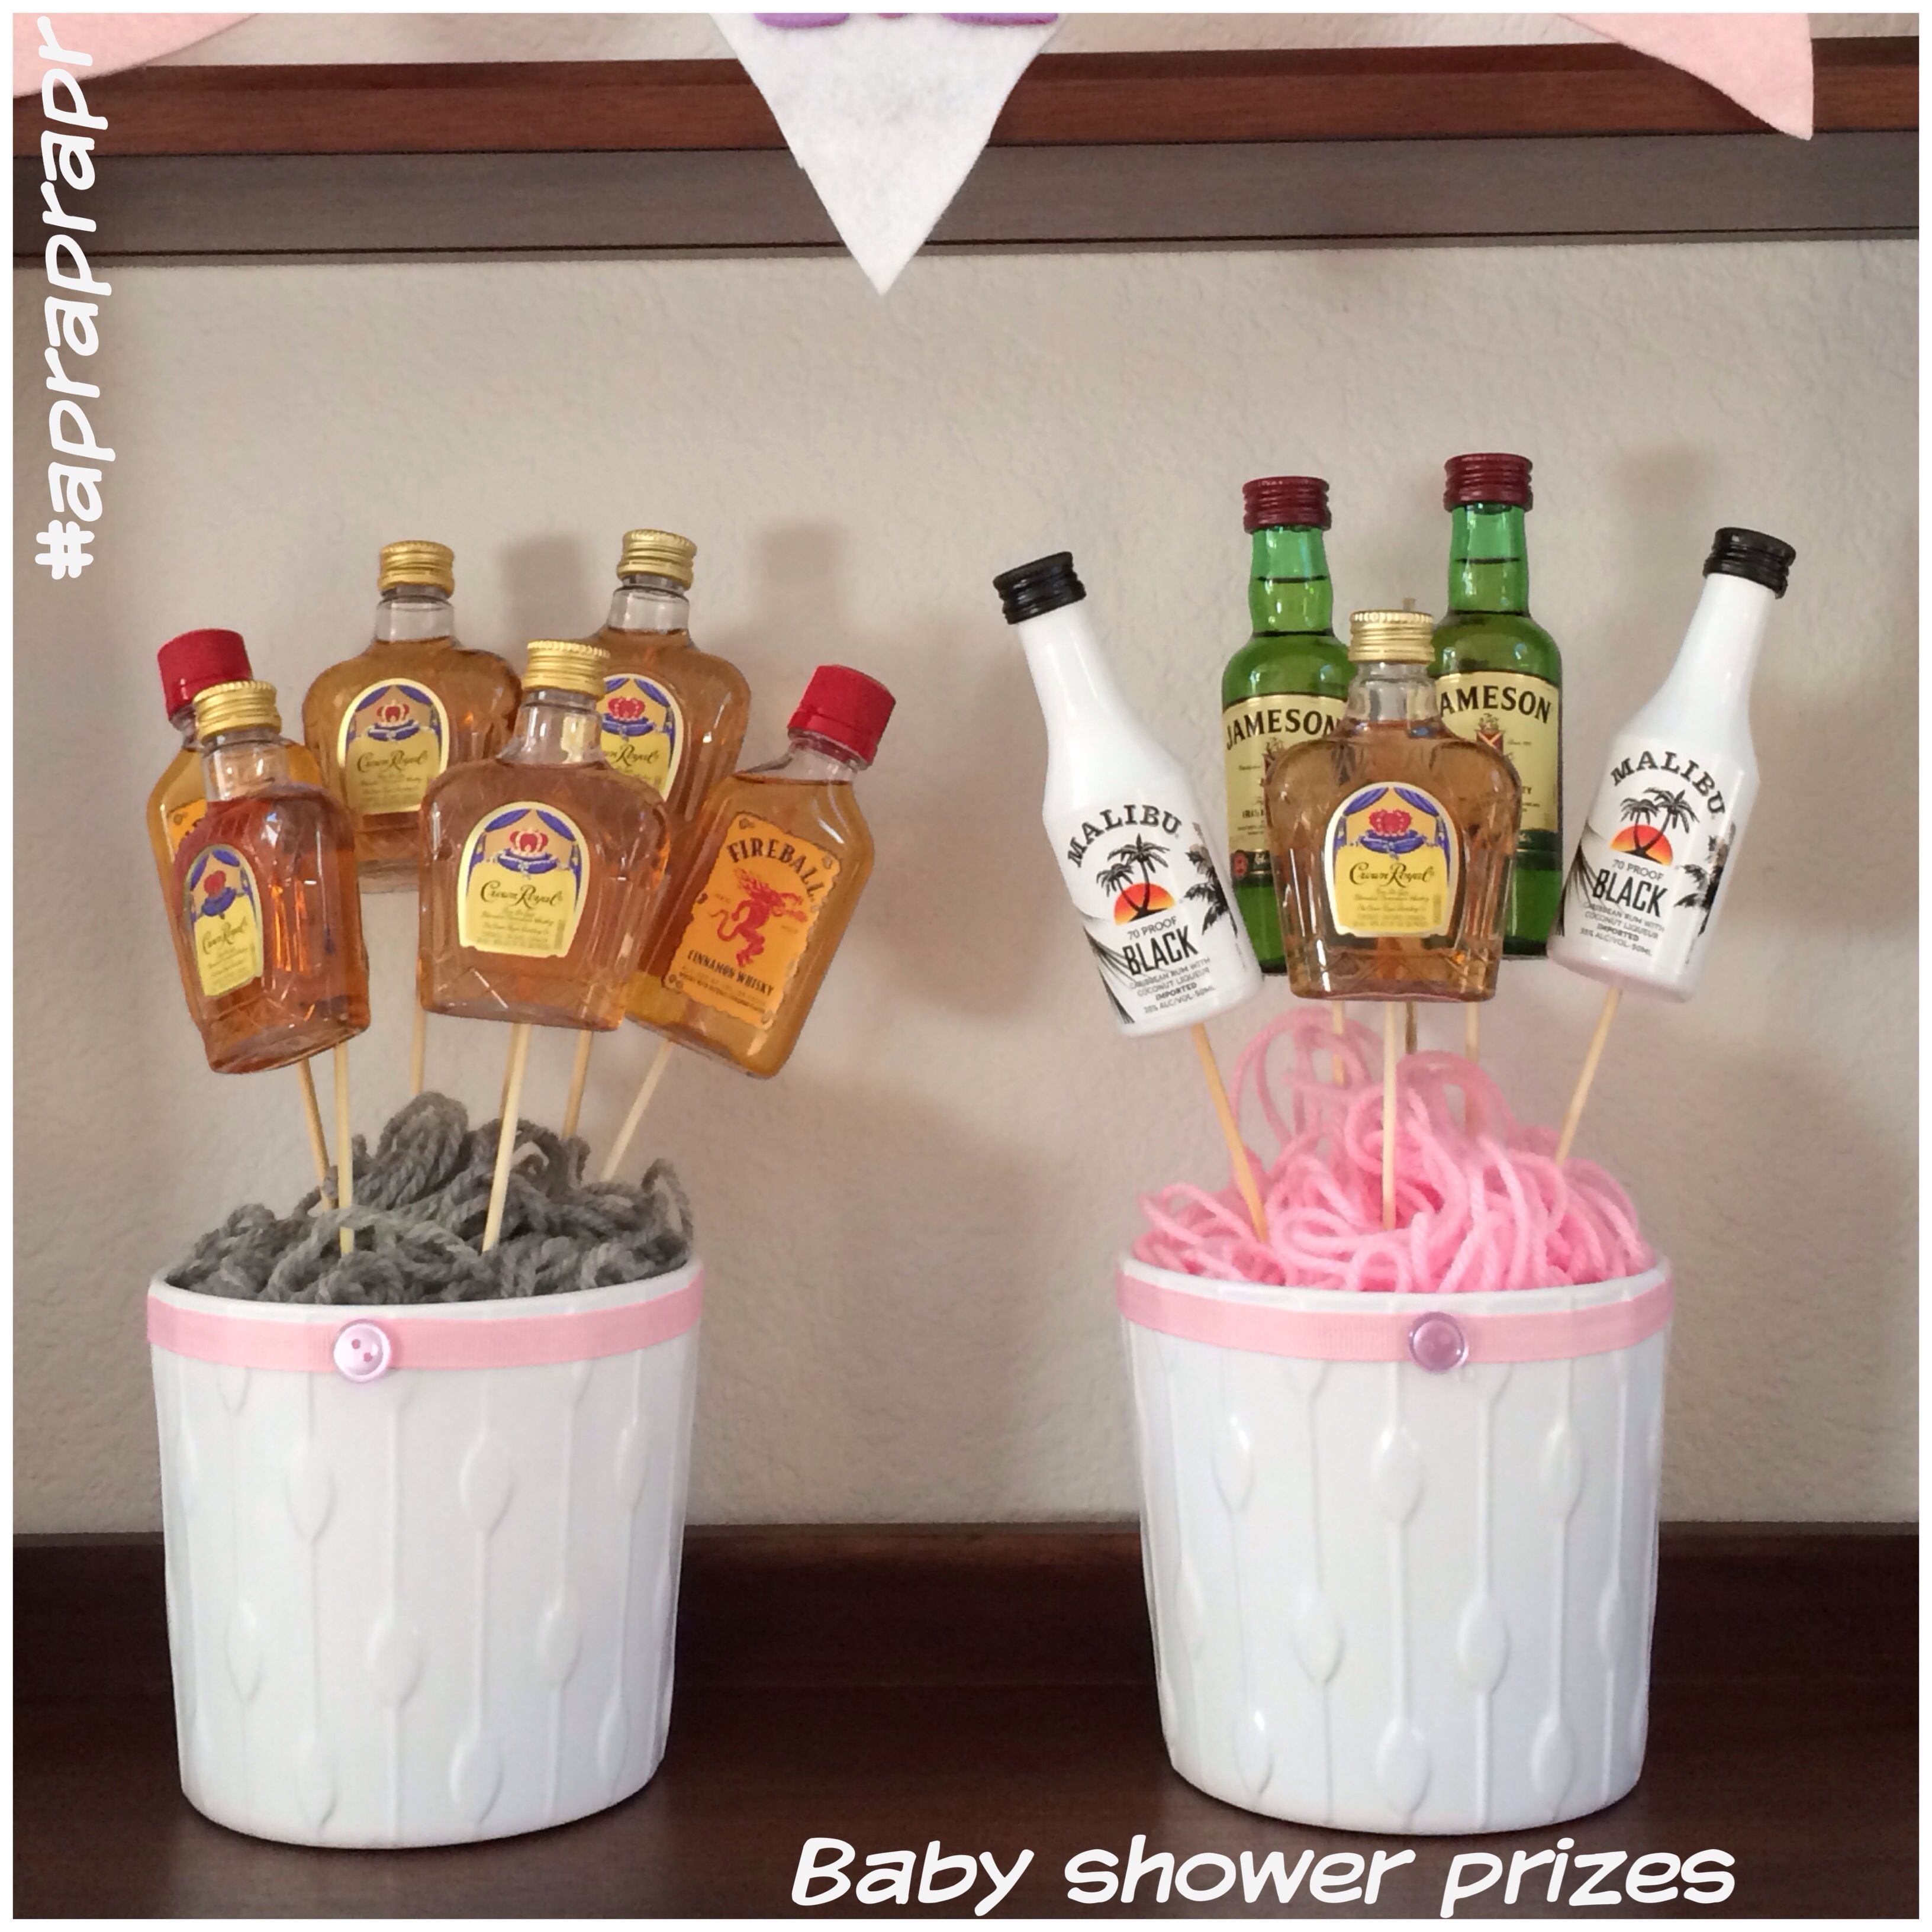 Coed Baby Shower Prizes / Baby shower ides coed 61+ Ideas | Baby shower prizes ... - Coed baby shower prizes for games that are inexpensive and great for coed baby showers, diaper raffle prizes, and more!